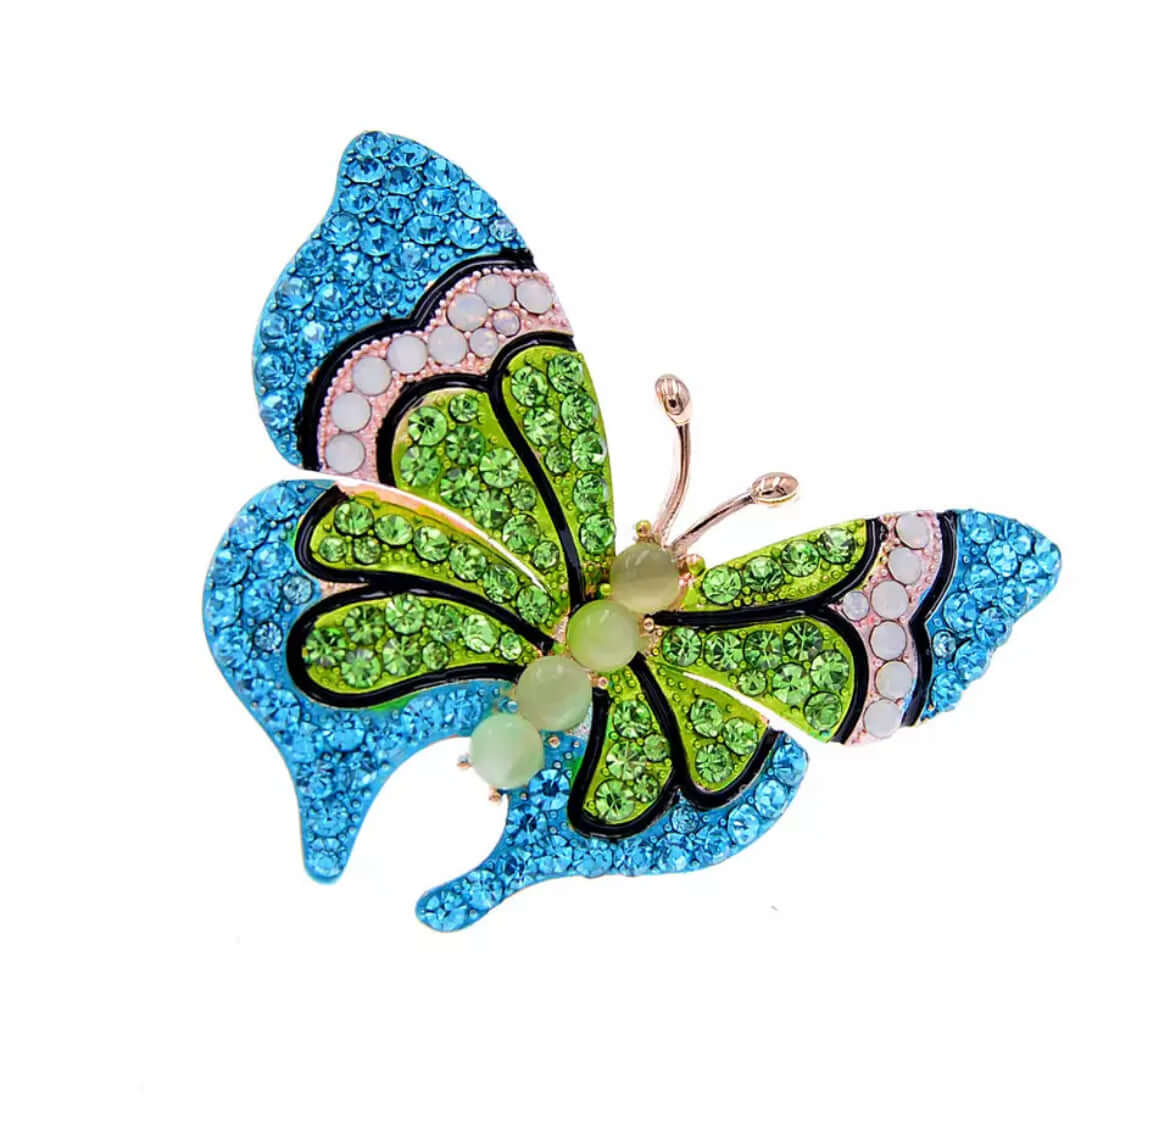 Butterfly brooch scarf green pin cocktail jewelry bridal gift